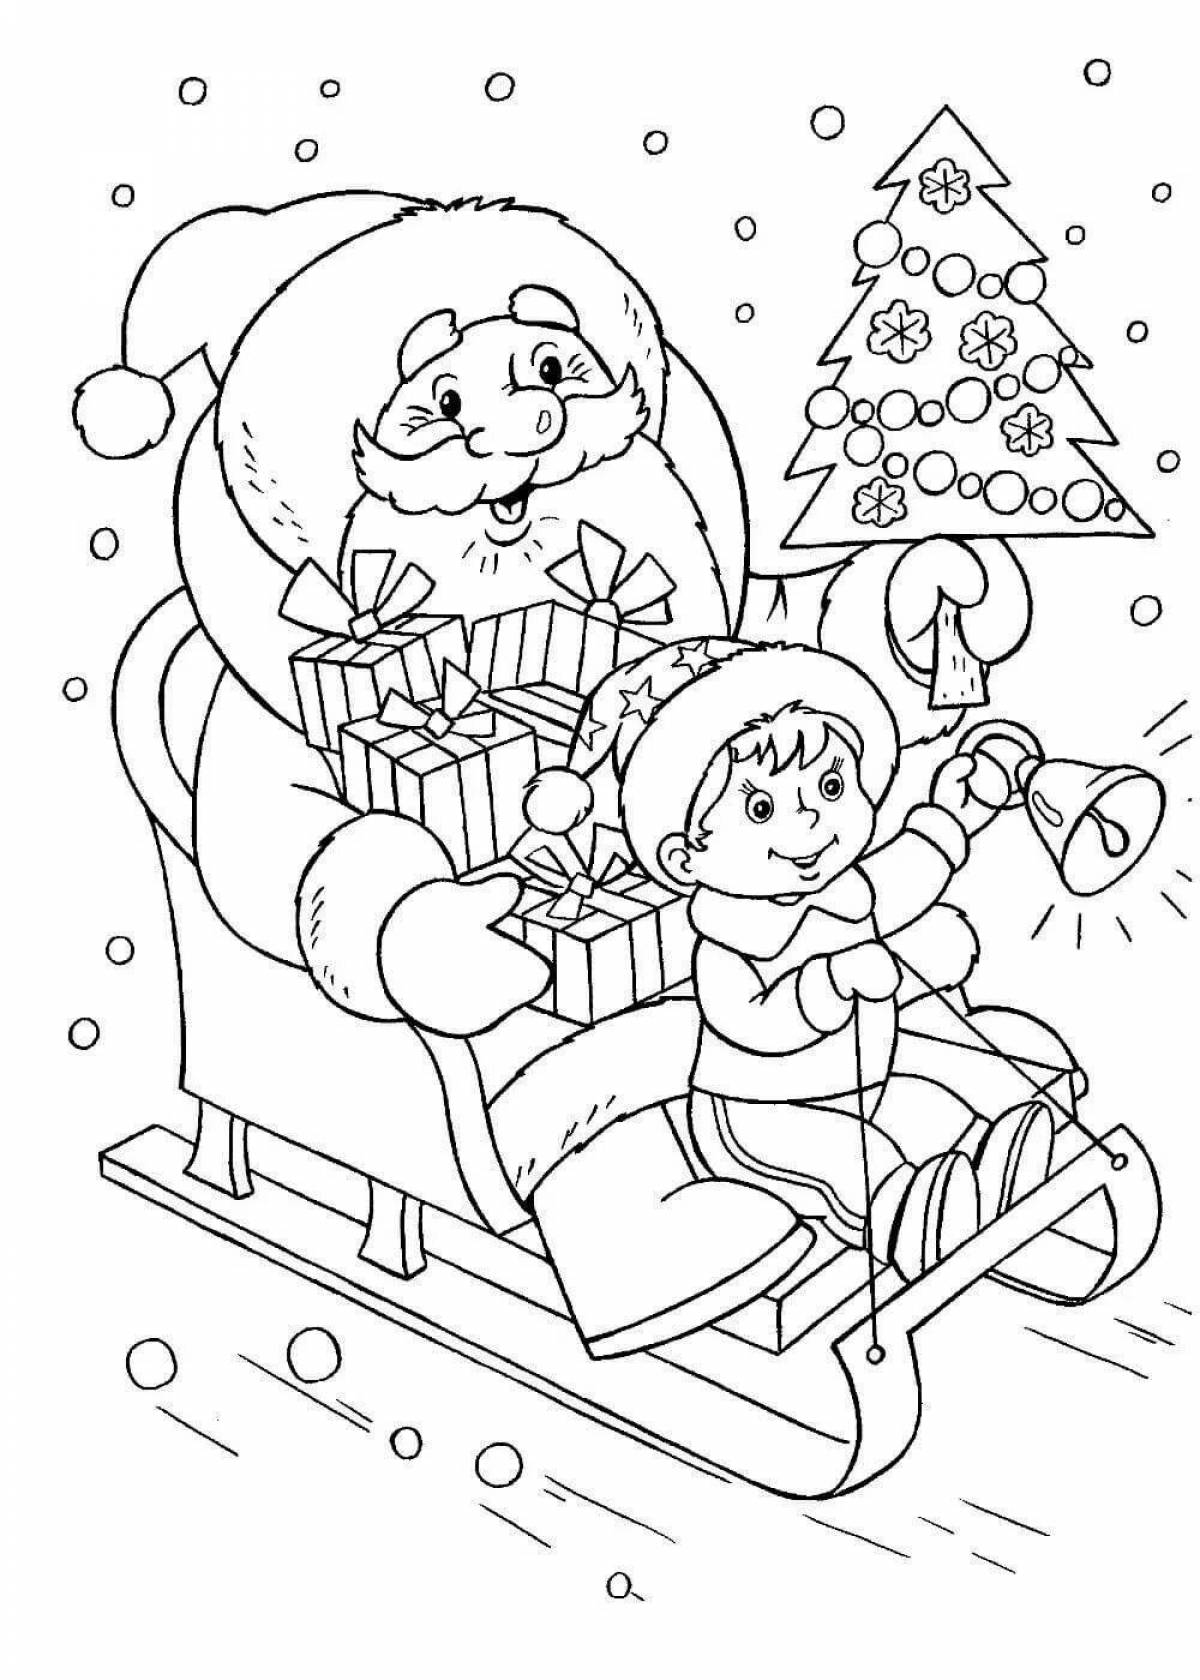 Coloring book dazzling Christmas tree